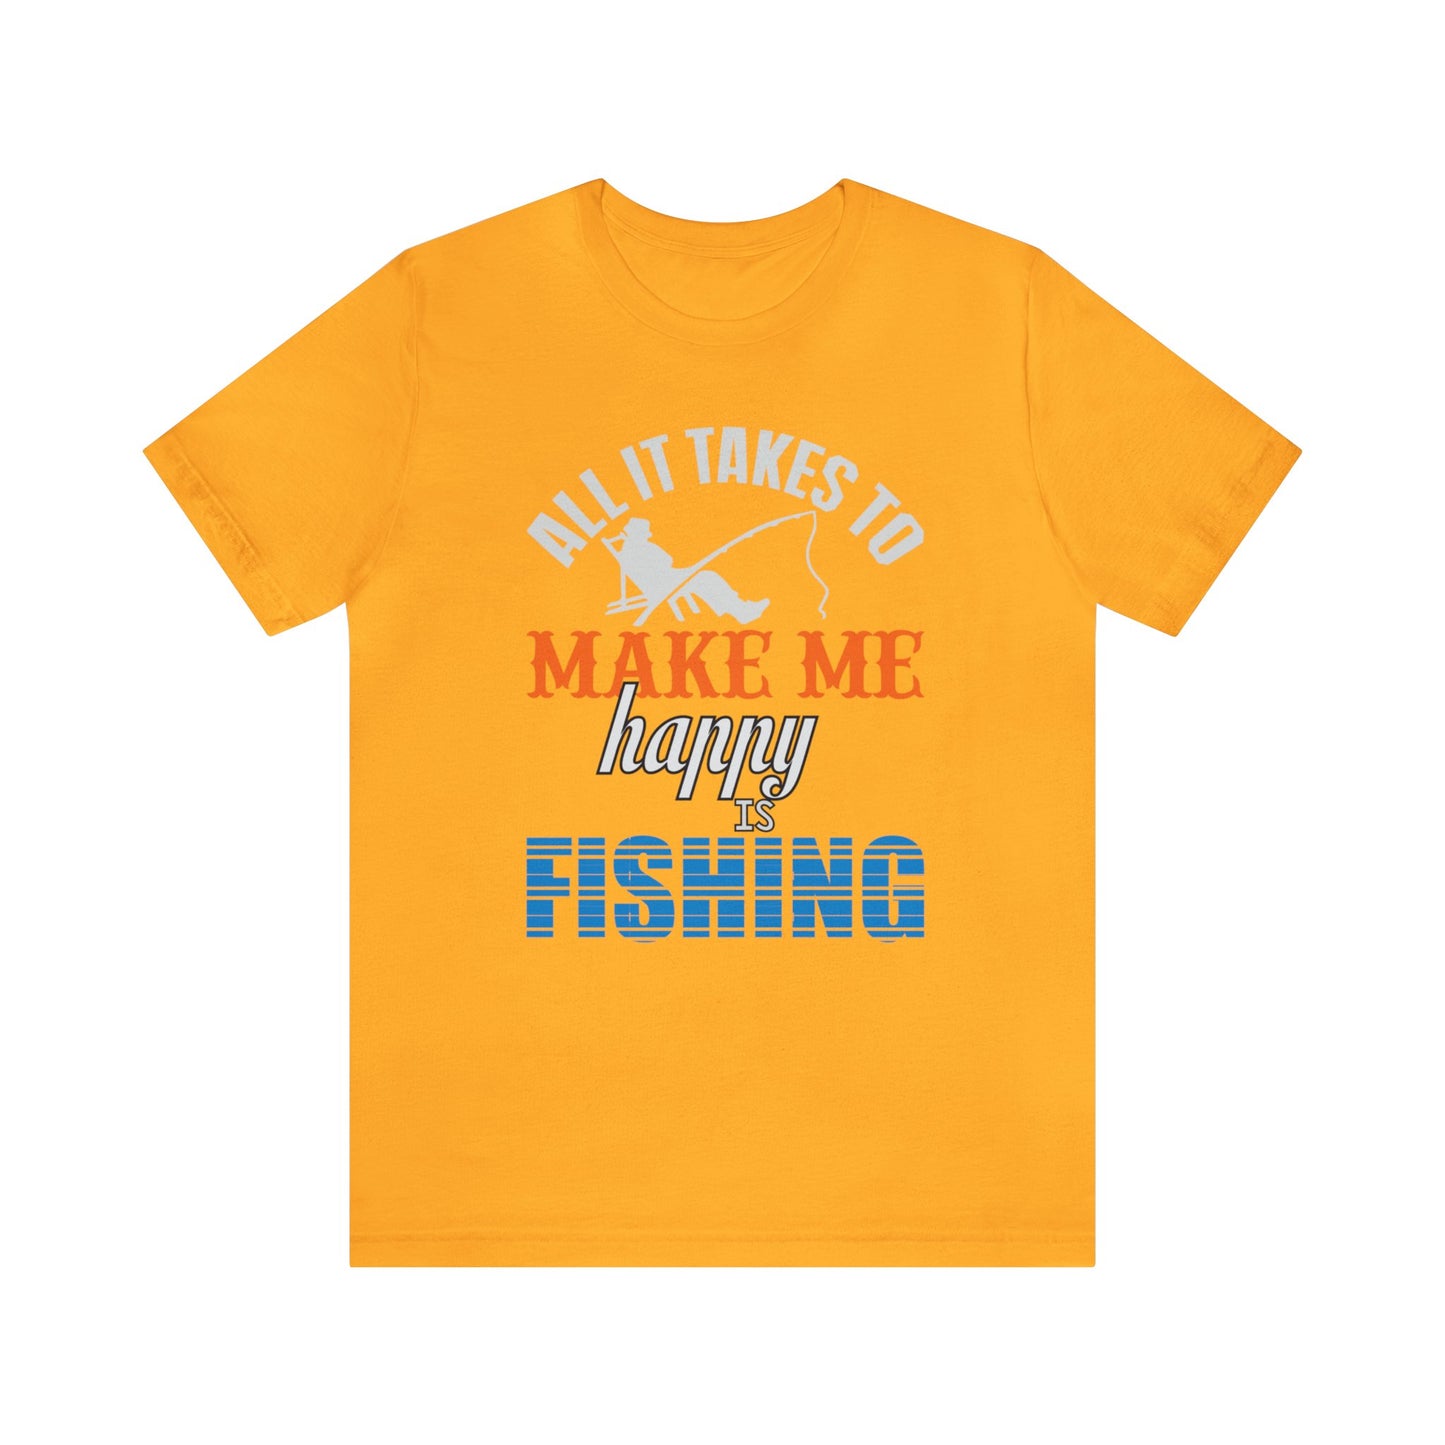 All it Takes to Make Me Happy is Fishing Valentine's Day Shirt